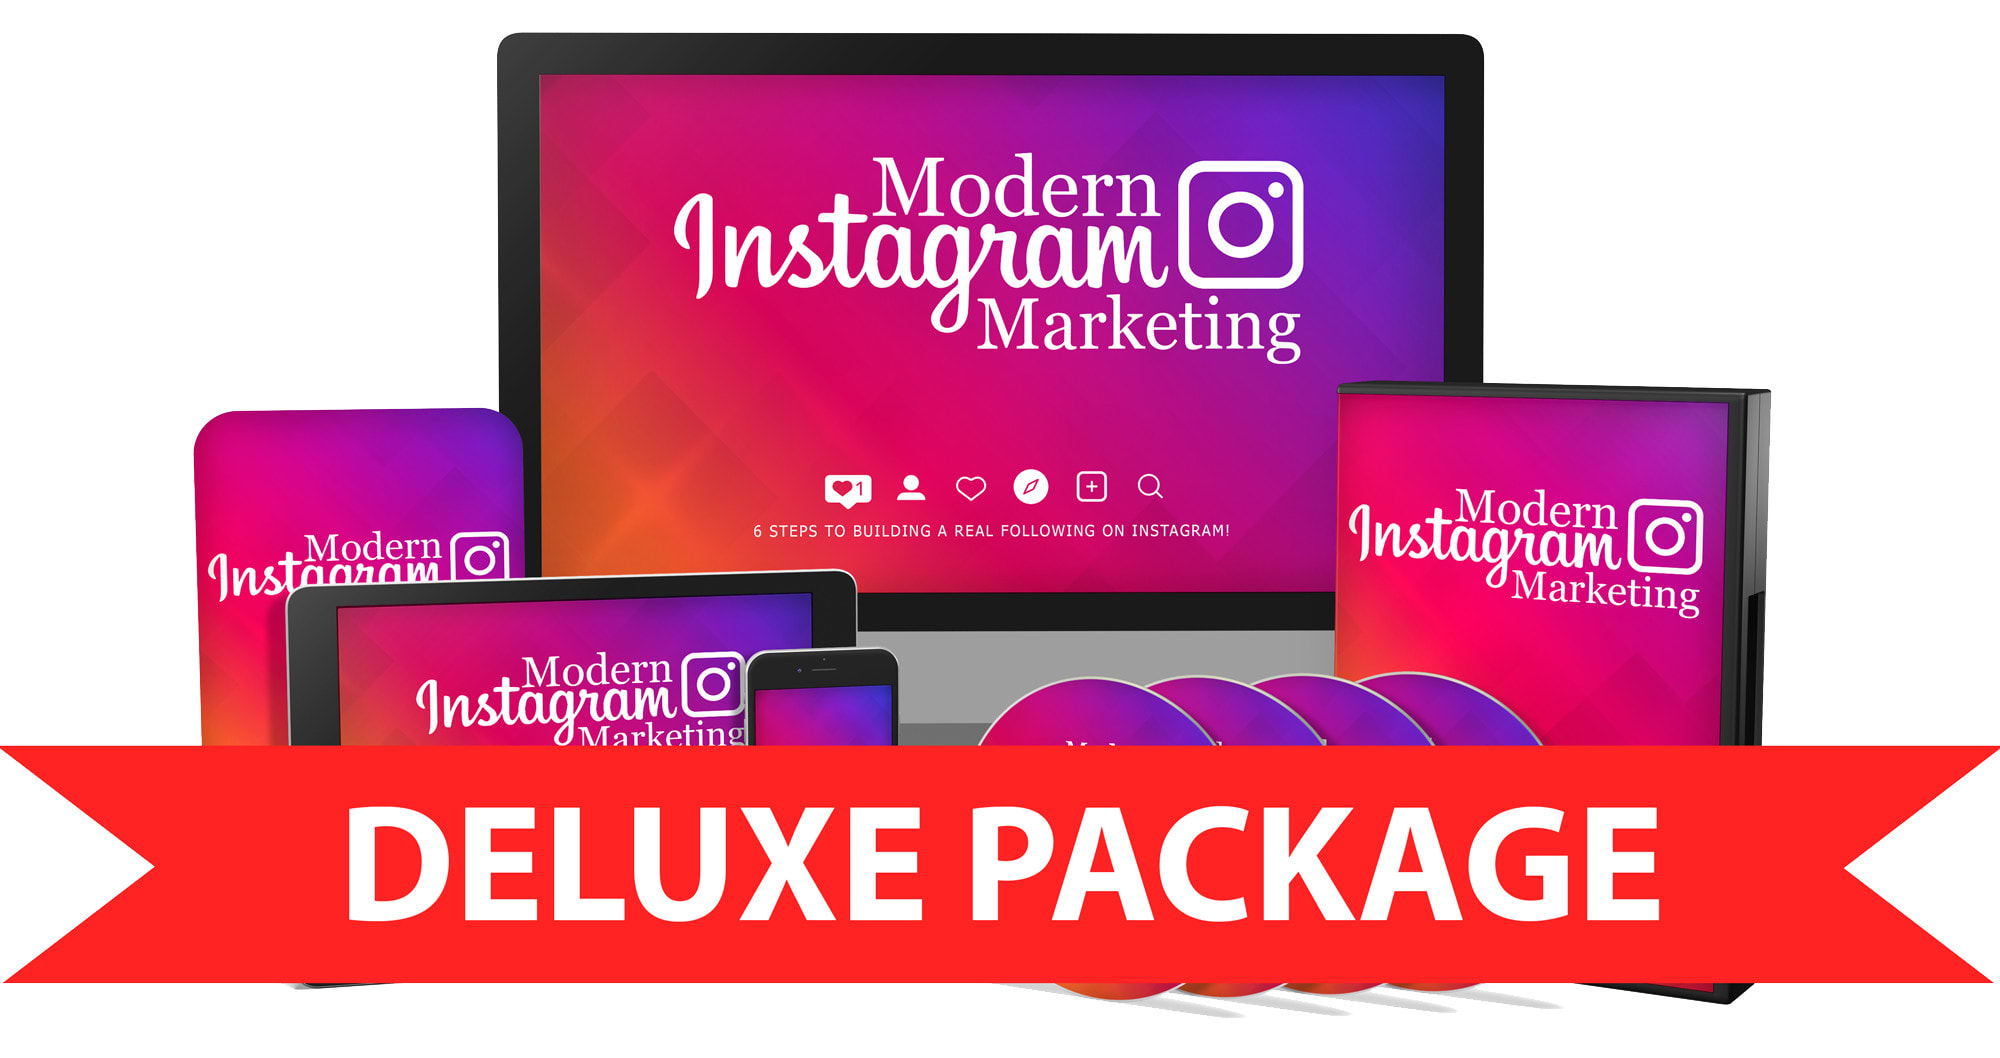 Give you video course on modern instagram marketing by Tomjacobk | Fiverr